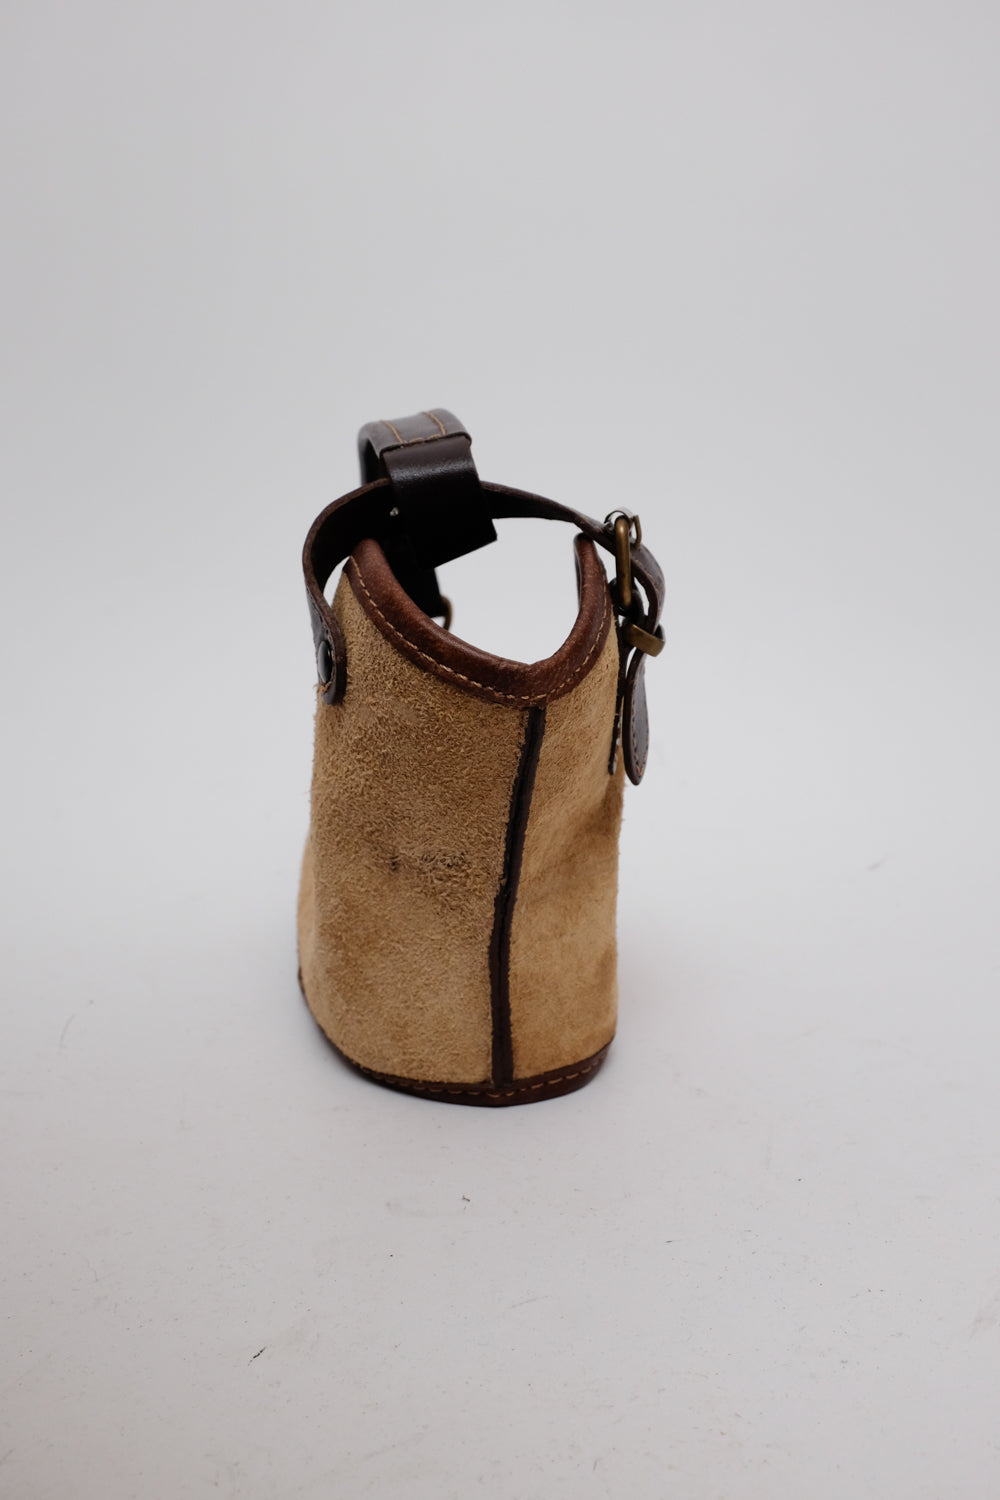 CURVED SMALL BROWN SUEDE LEATHER BAG